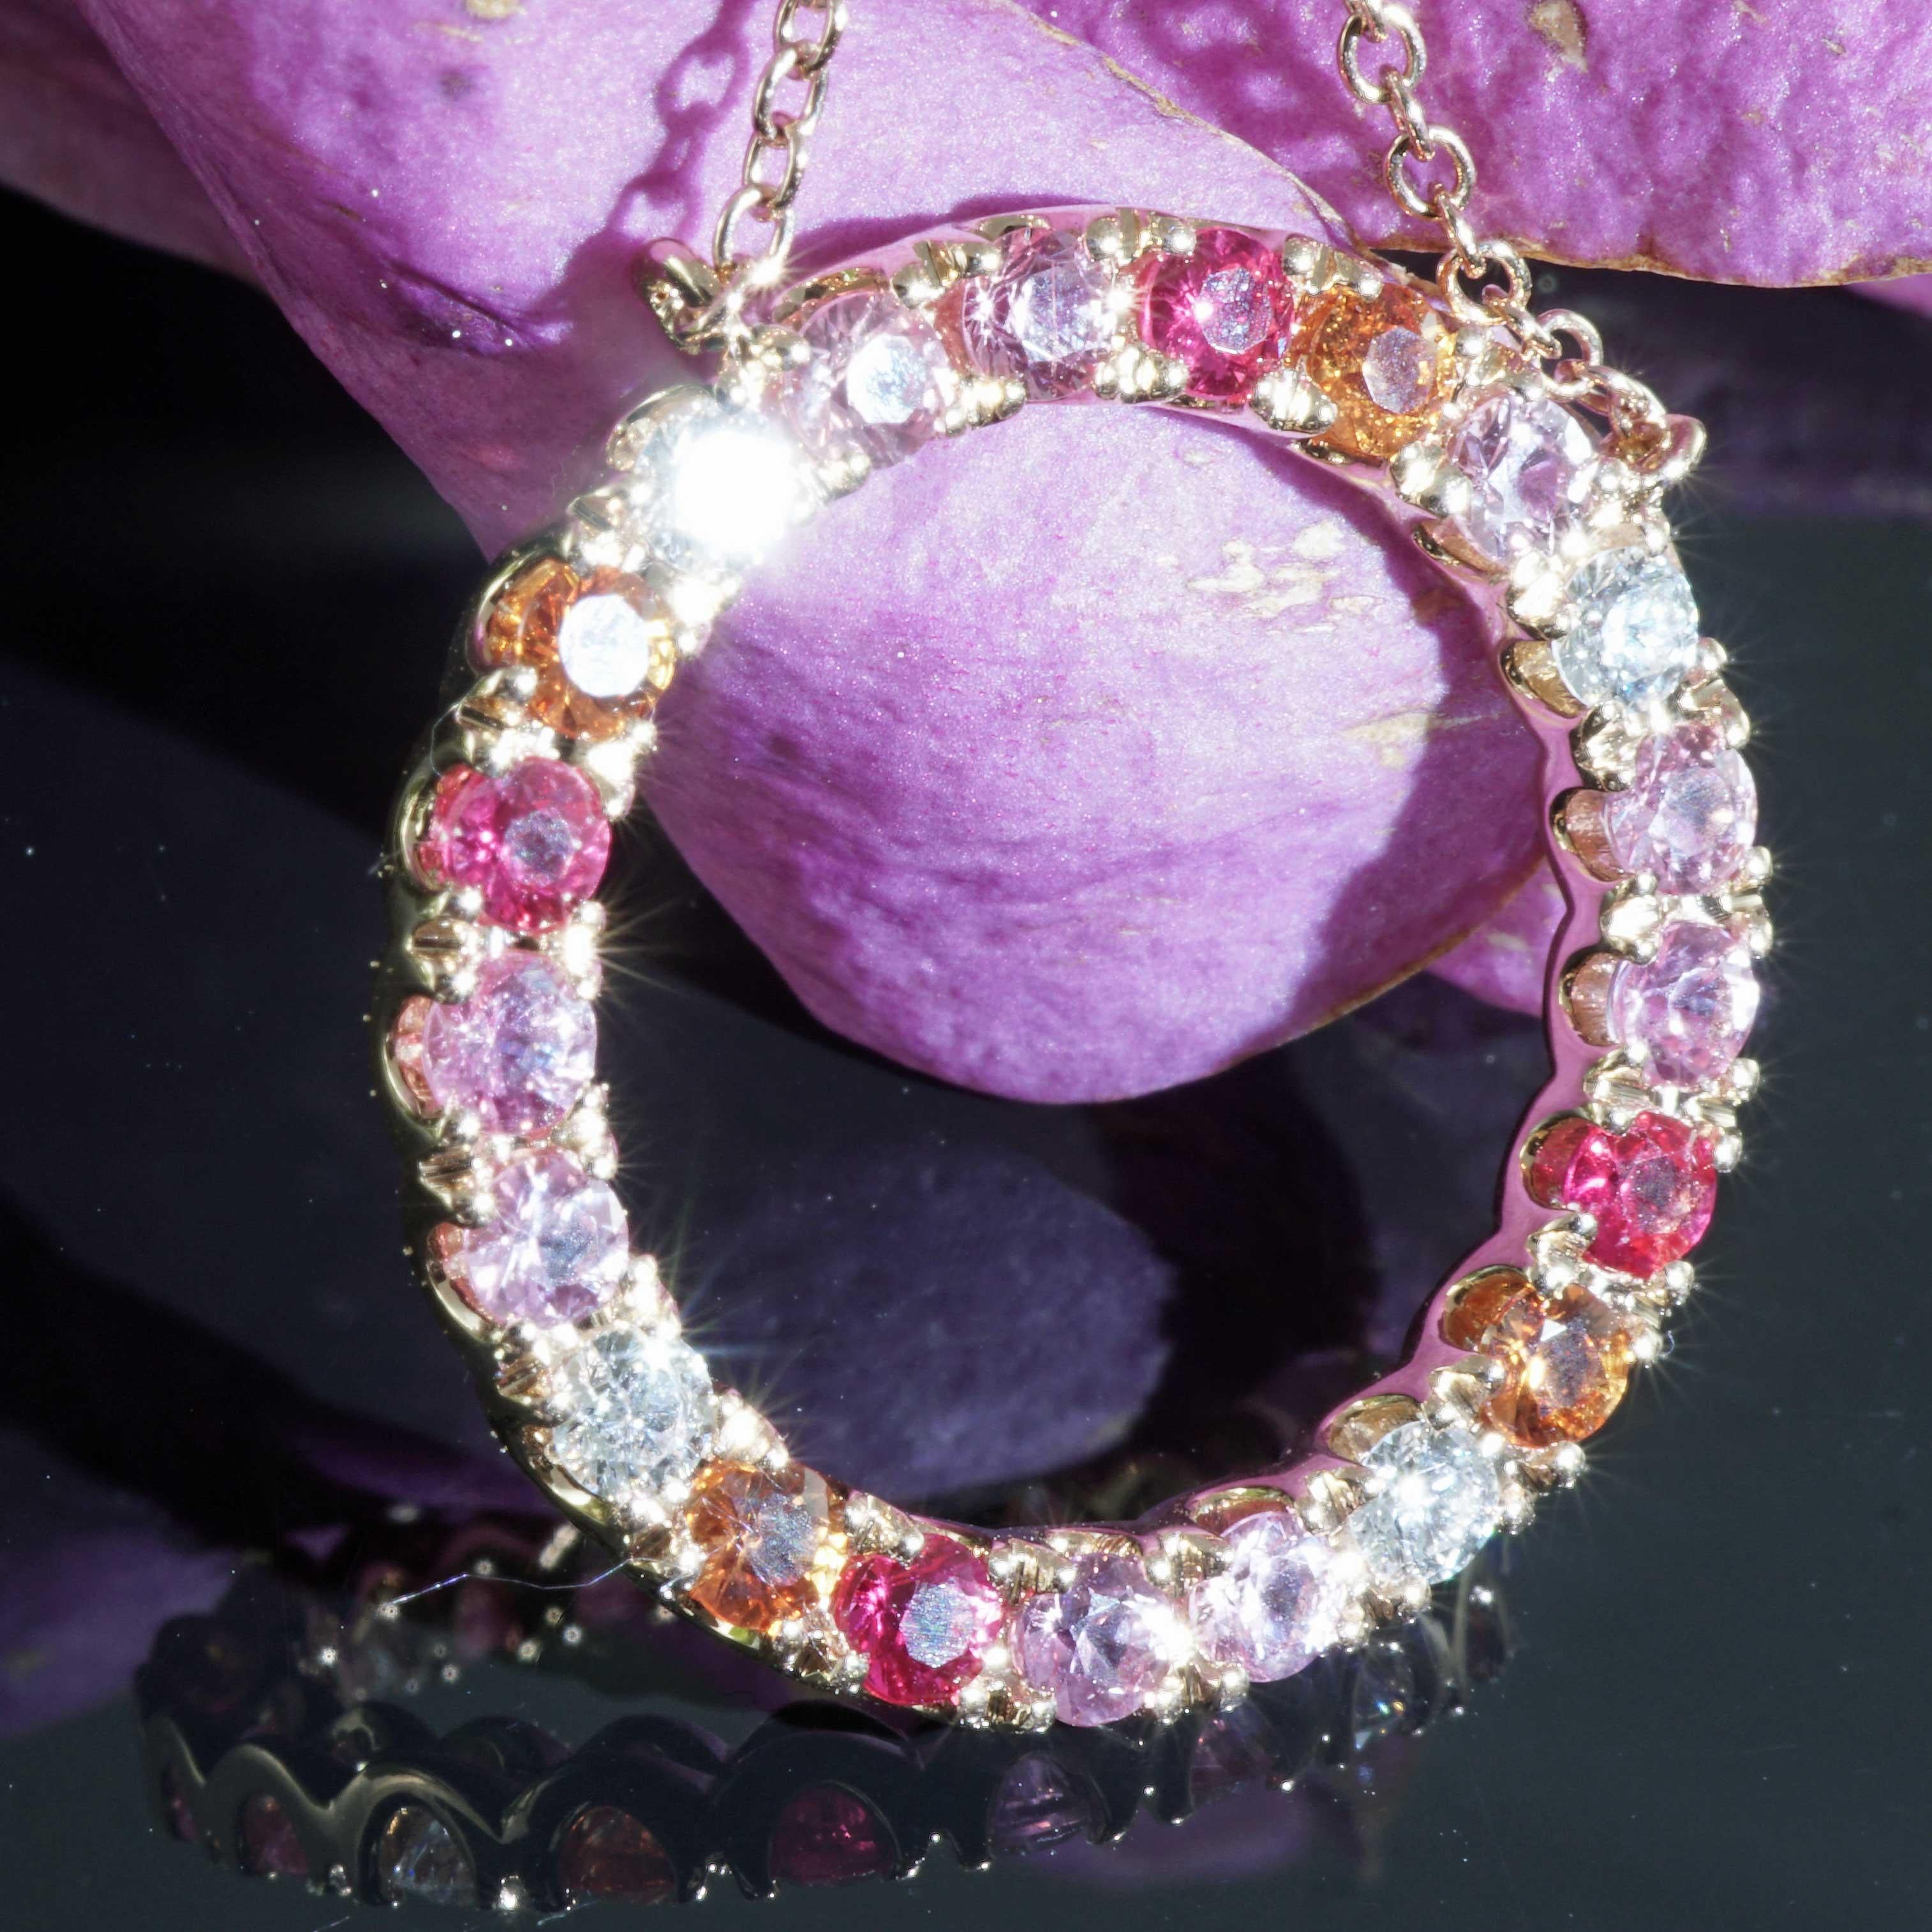 Saphire Brilliant Necklace stunning play of Colors pink orange Saphires 1.21 ct  For Sale 1